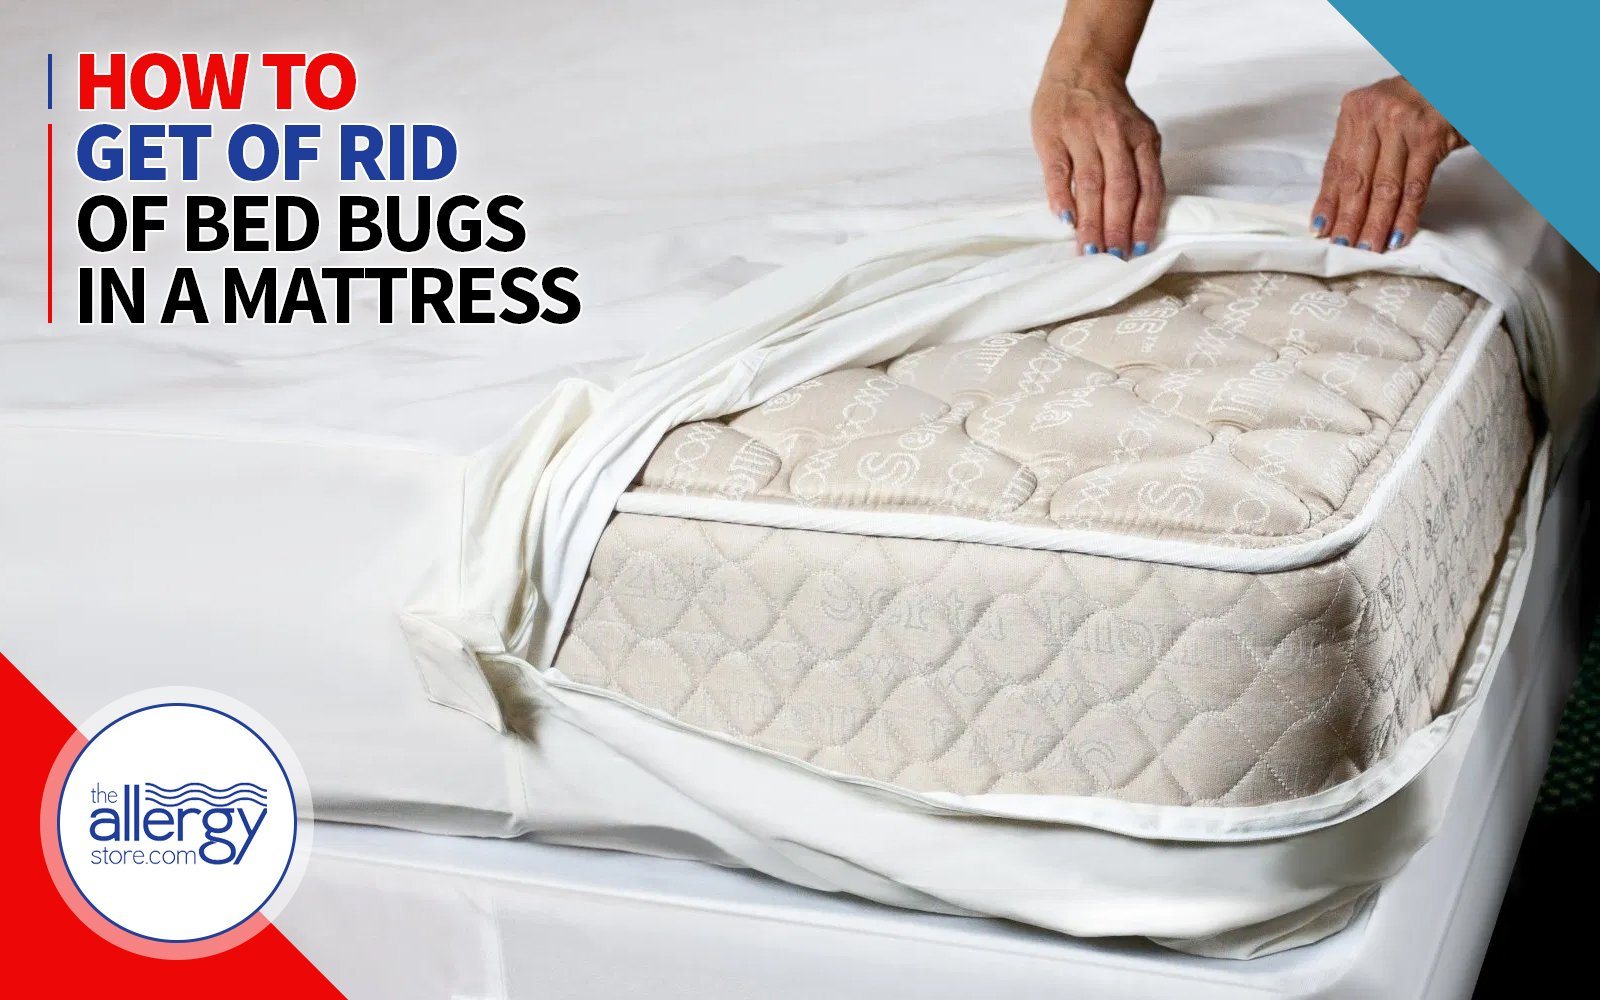 How to Get of Rid of Bed Bugs in a Mattress